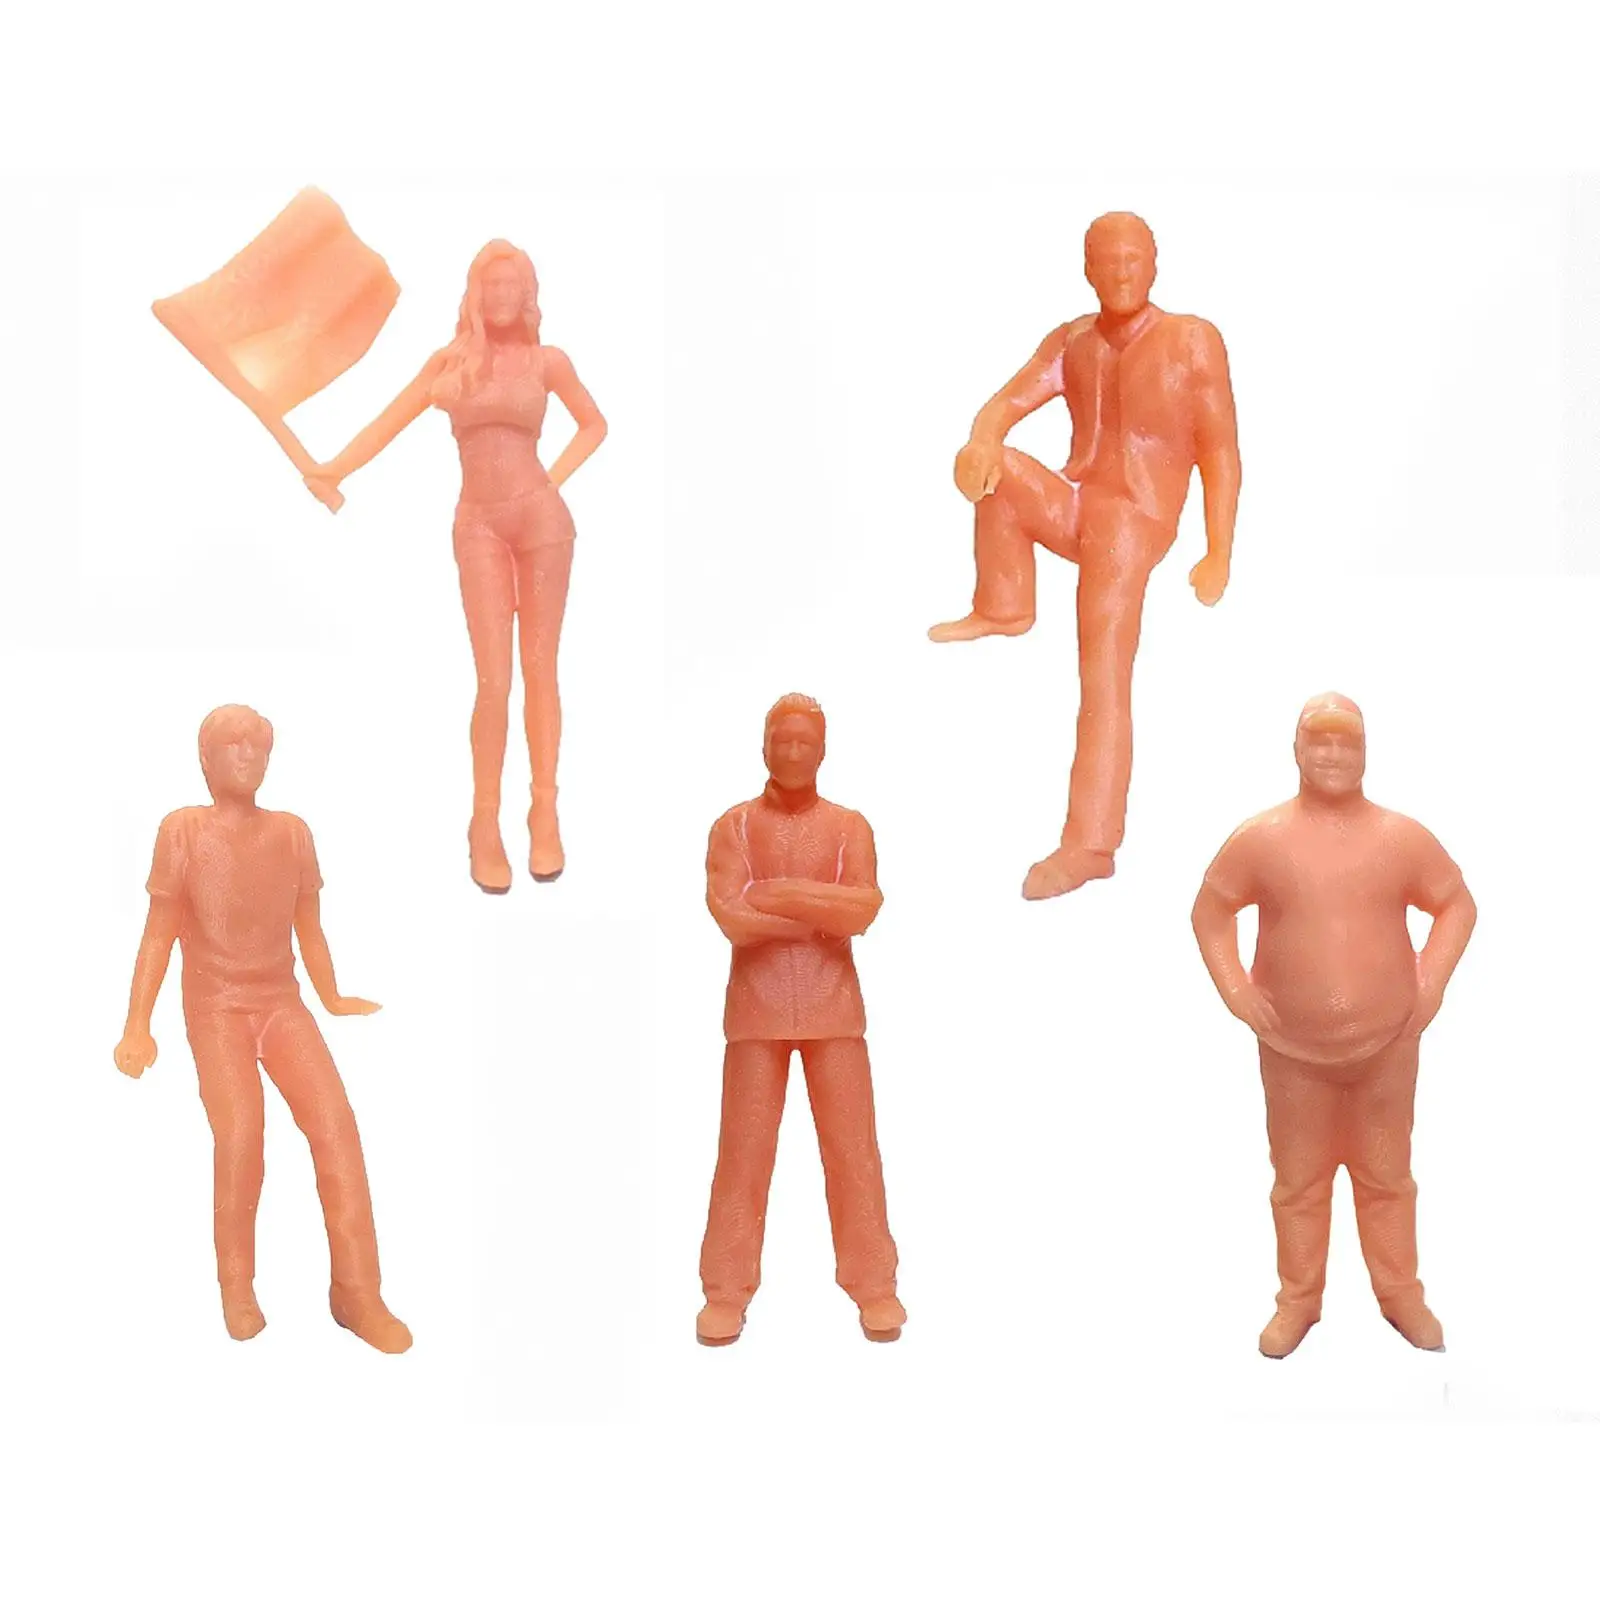 5Pcs 1/64 Figures Set Assorted Poses Unpainted Figures Tiny People for Architectural Layout Project Diorama Sand Table Decor